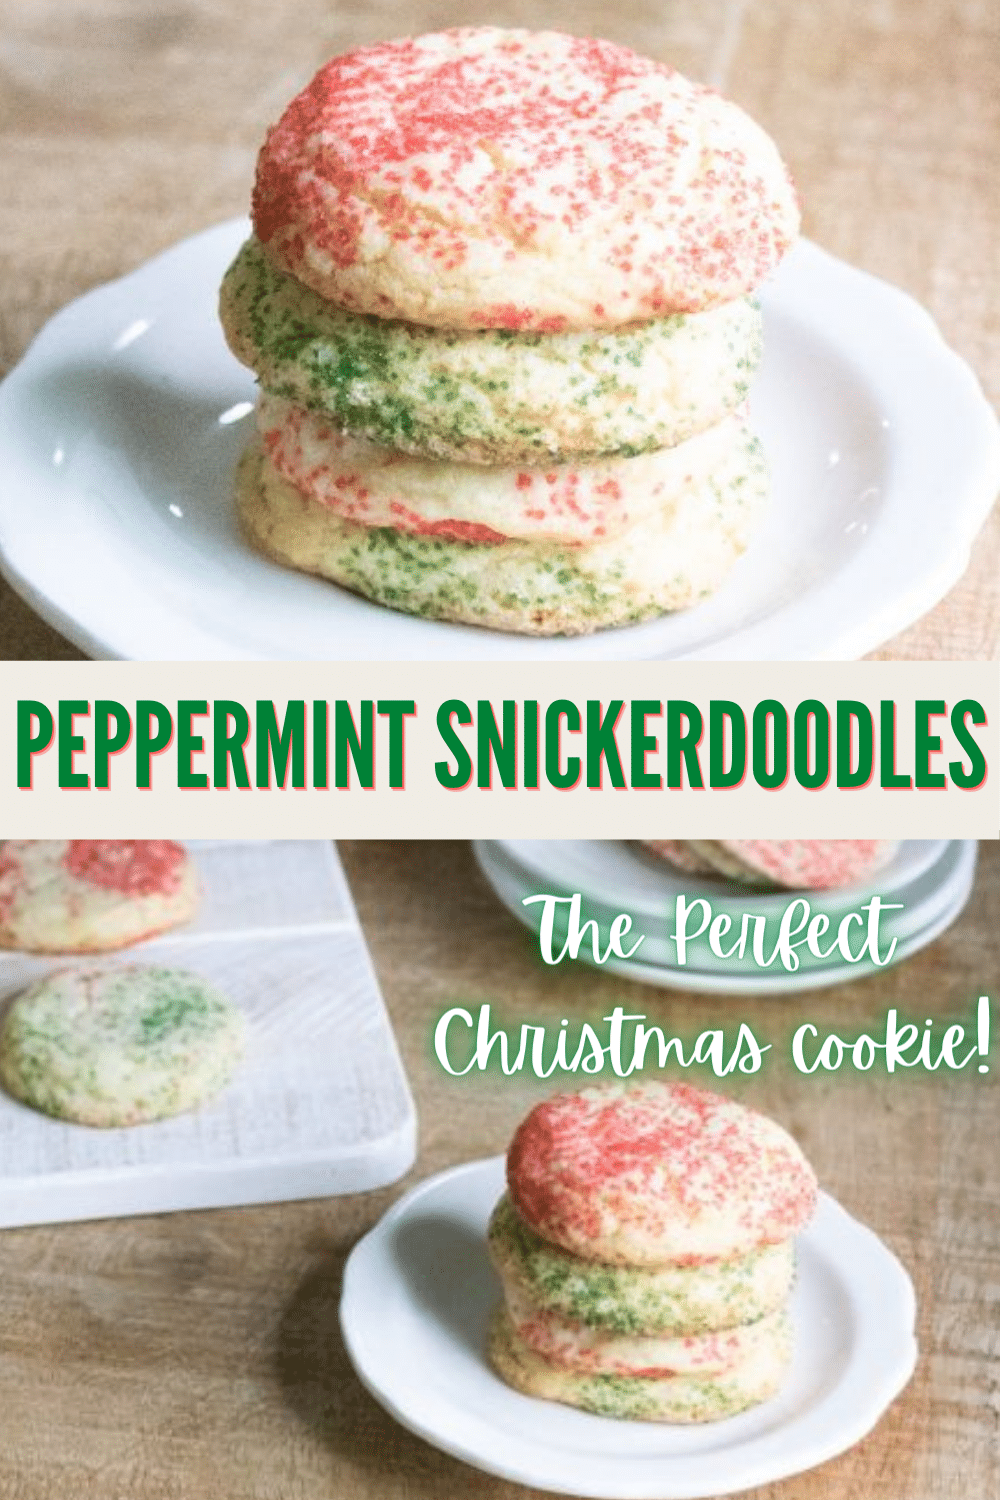 Peppermint Snickerdoodles are a delicious cookie treat that is perfect for Christmas and cookie exchanges. These easy cookies are beautiful on a platter. #snickerdoodles #cookies #christmascookies via @wondermomwannab